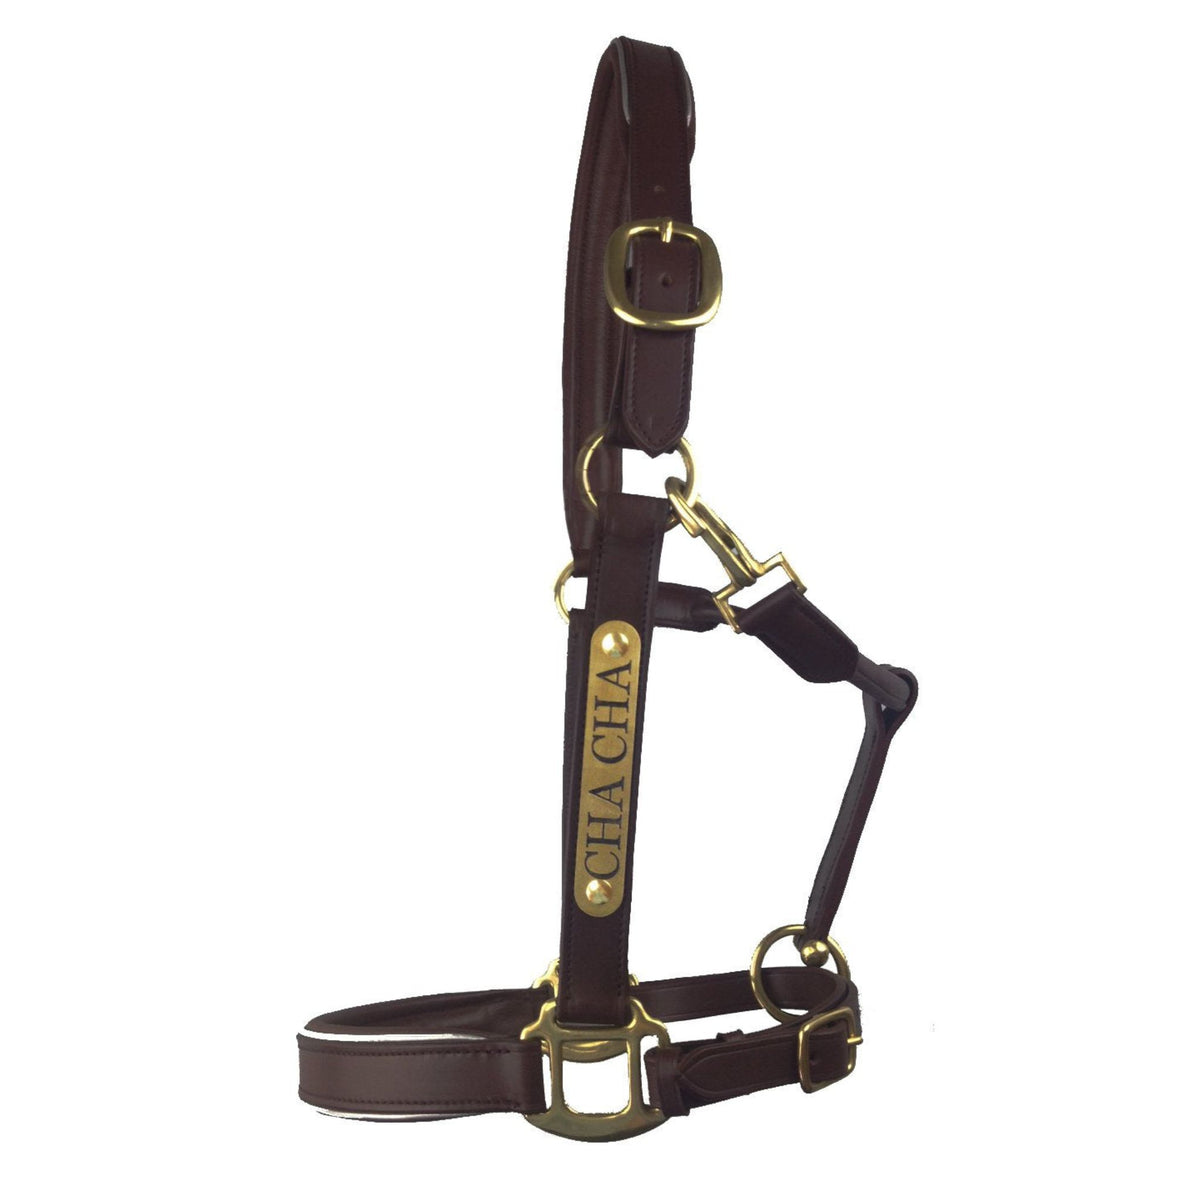 Brown leather halter with brass nameplate on near side, fixings and details.